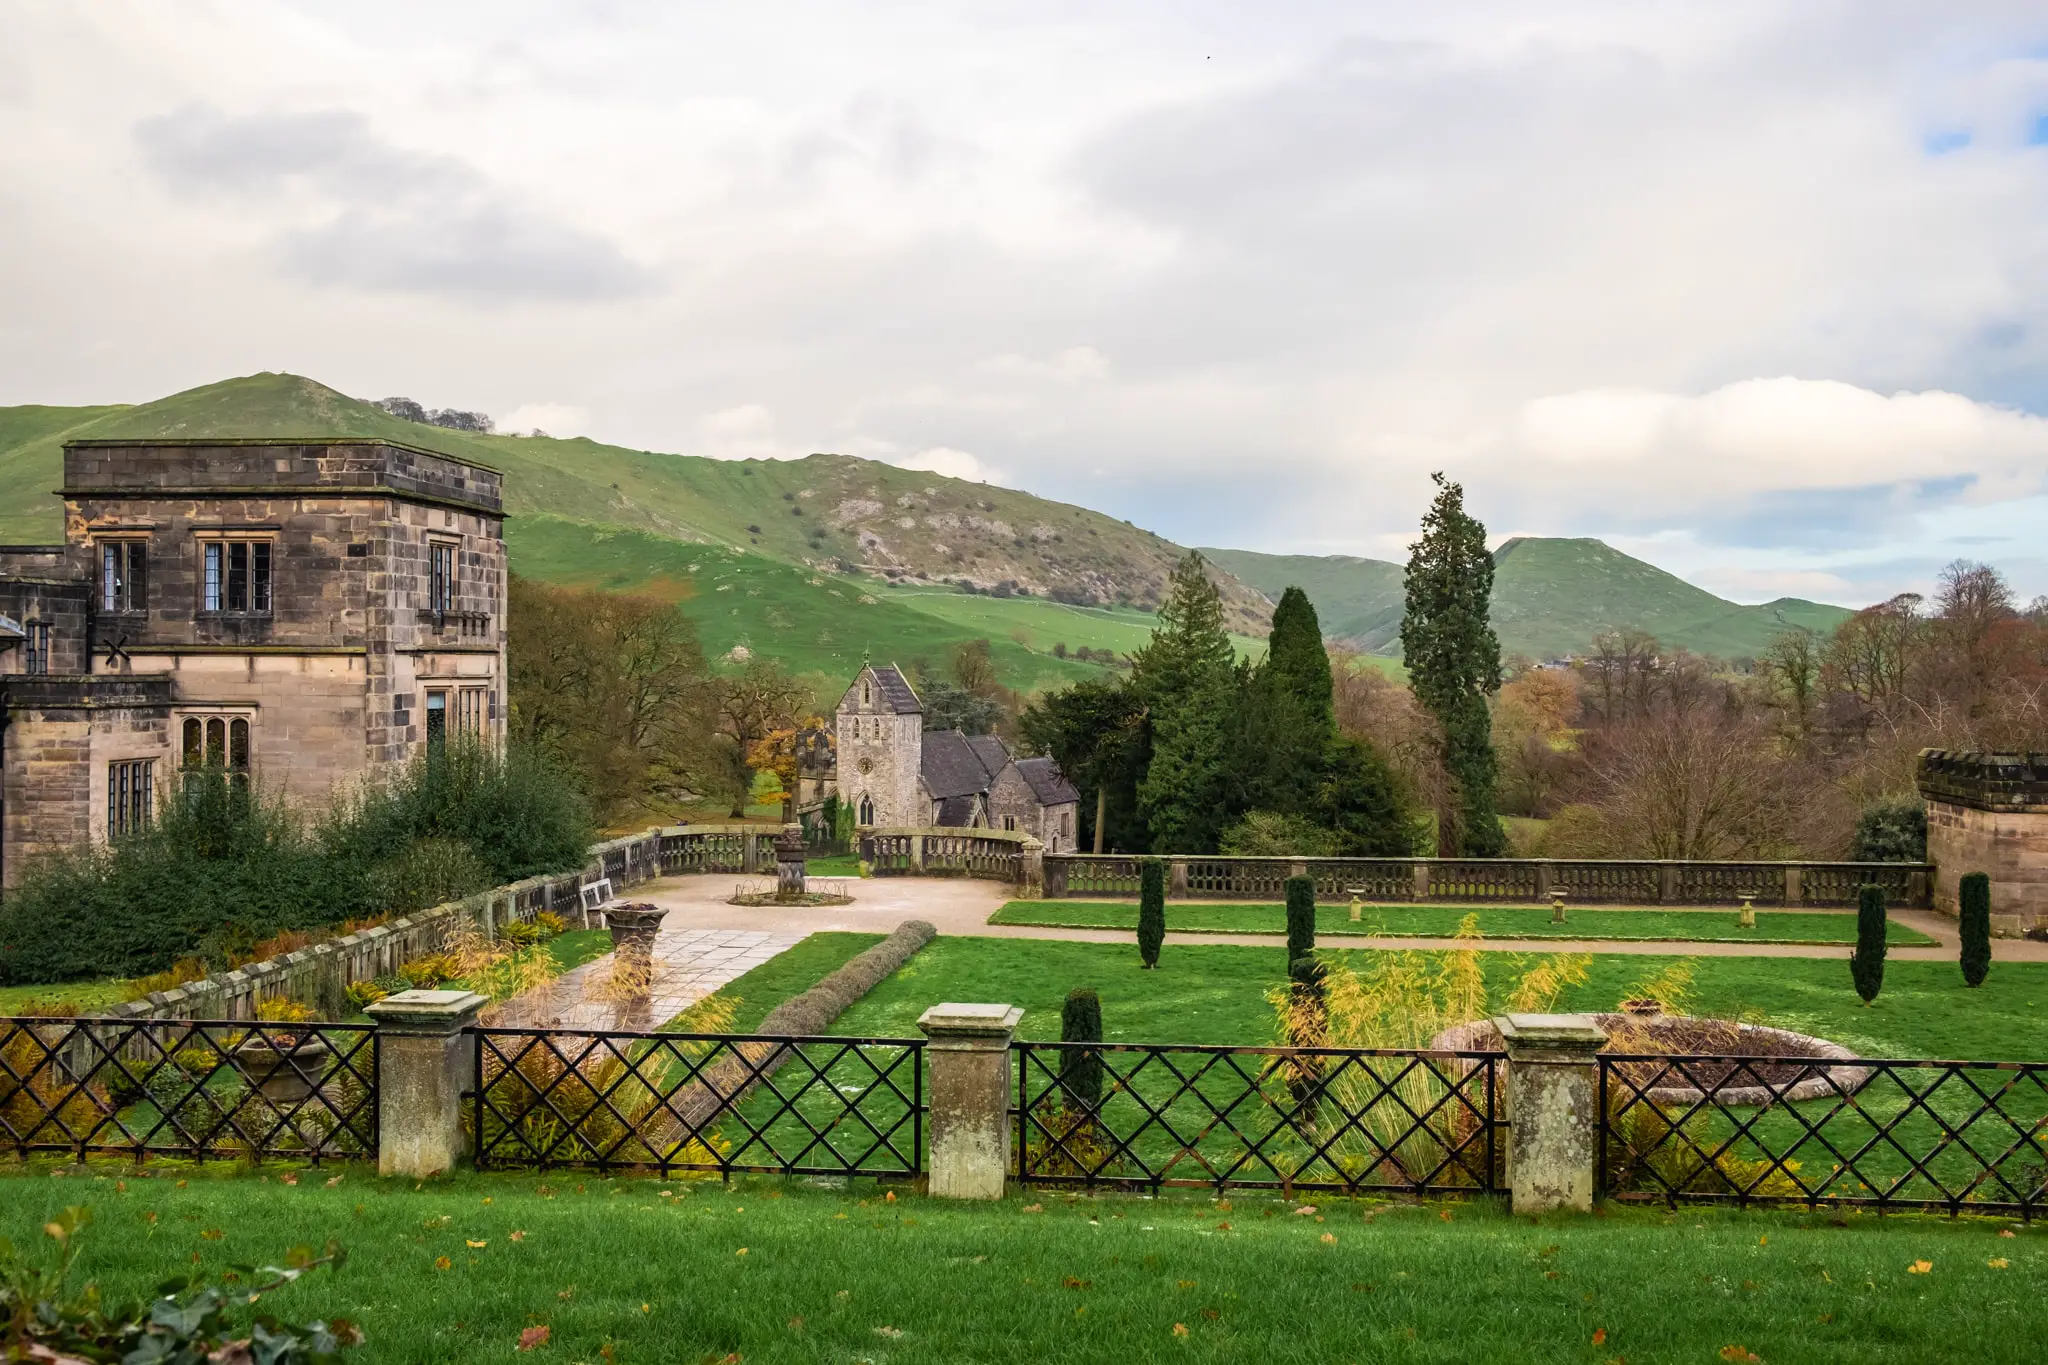 A Day Trip to Ilam: the Prettiest Village in Staffordshire